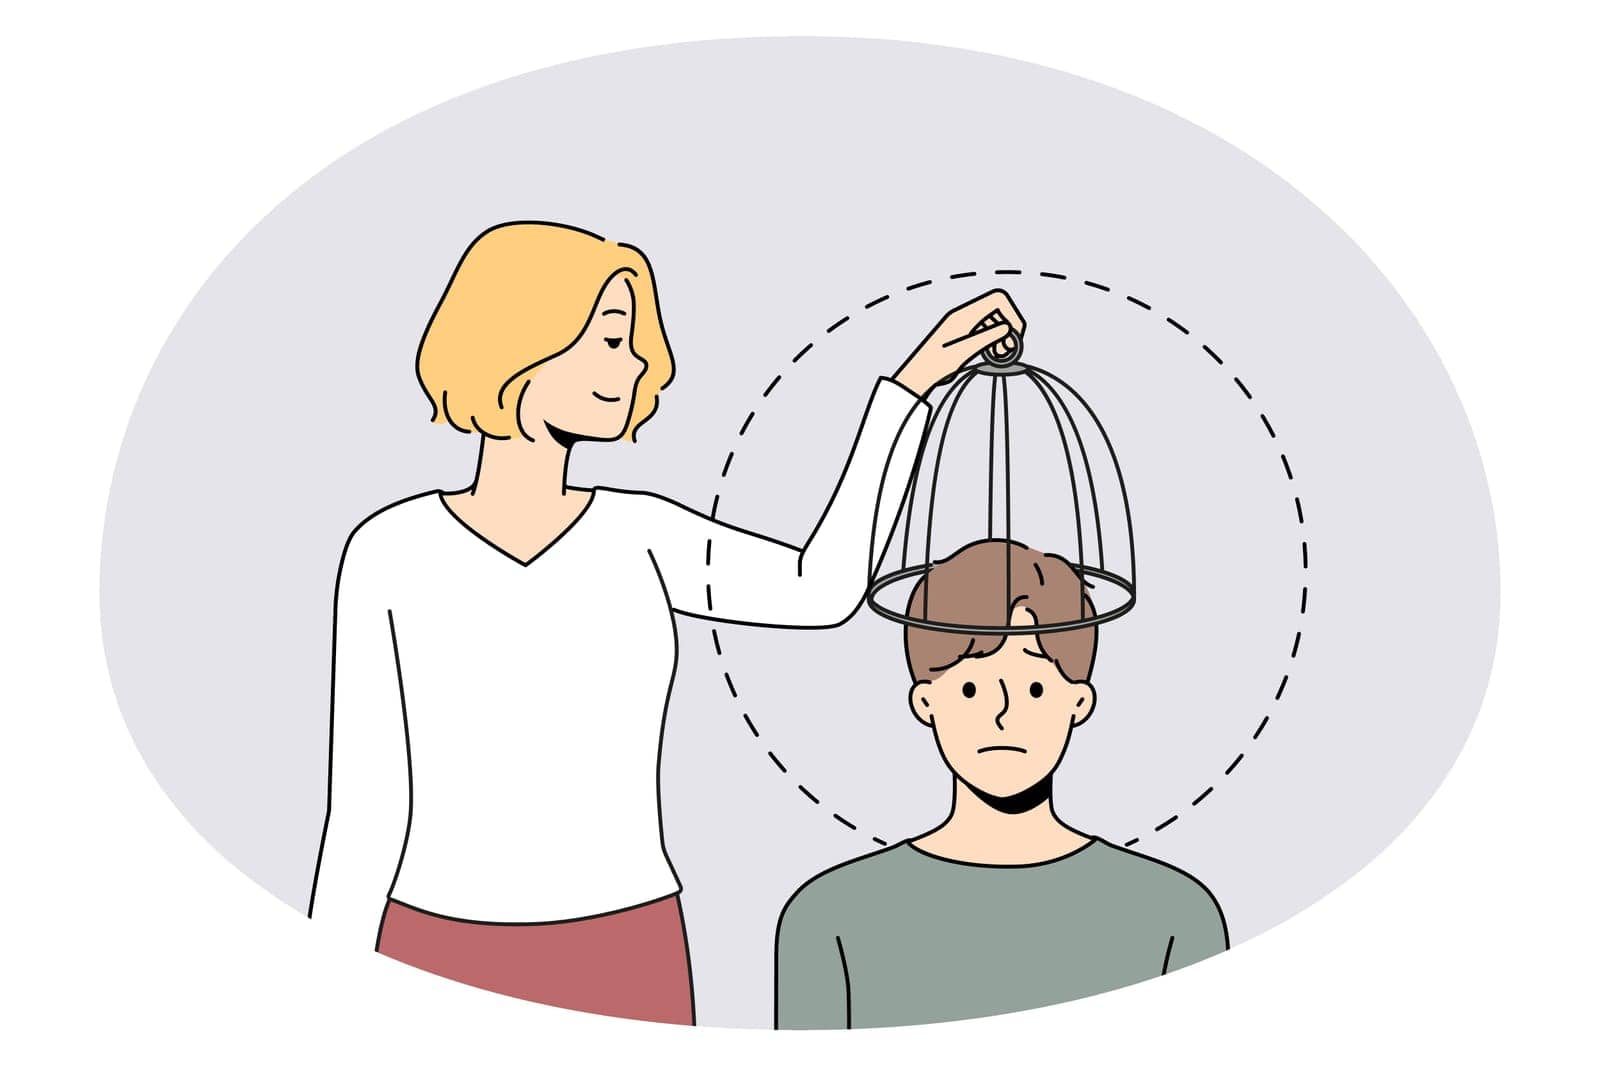 Woman take cage from man head free his mind to new ideas and knowledge. Concept of brain free from imprisonment. Creative thinking and unlock potential. Vector illustration.